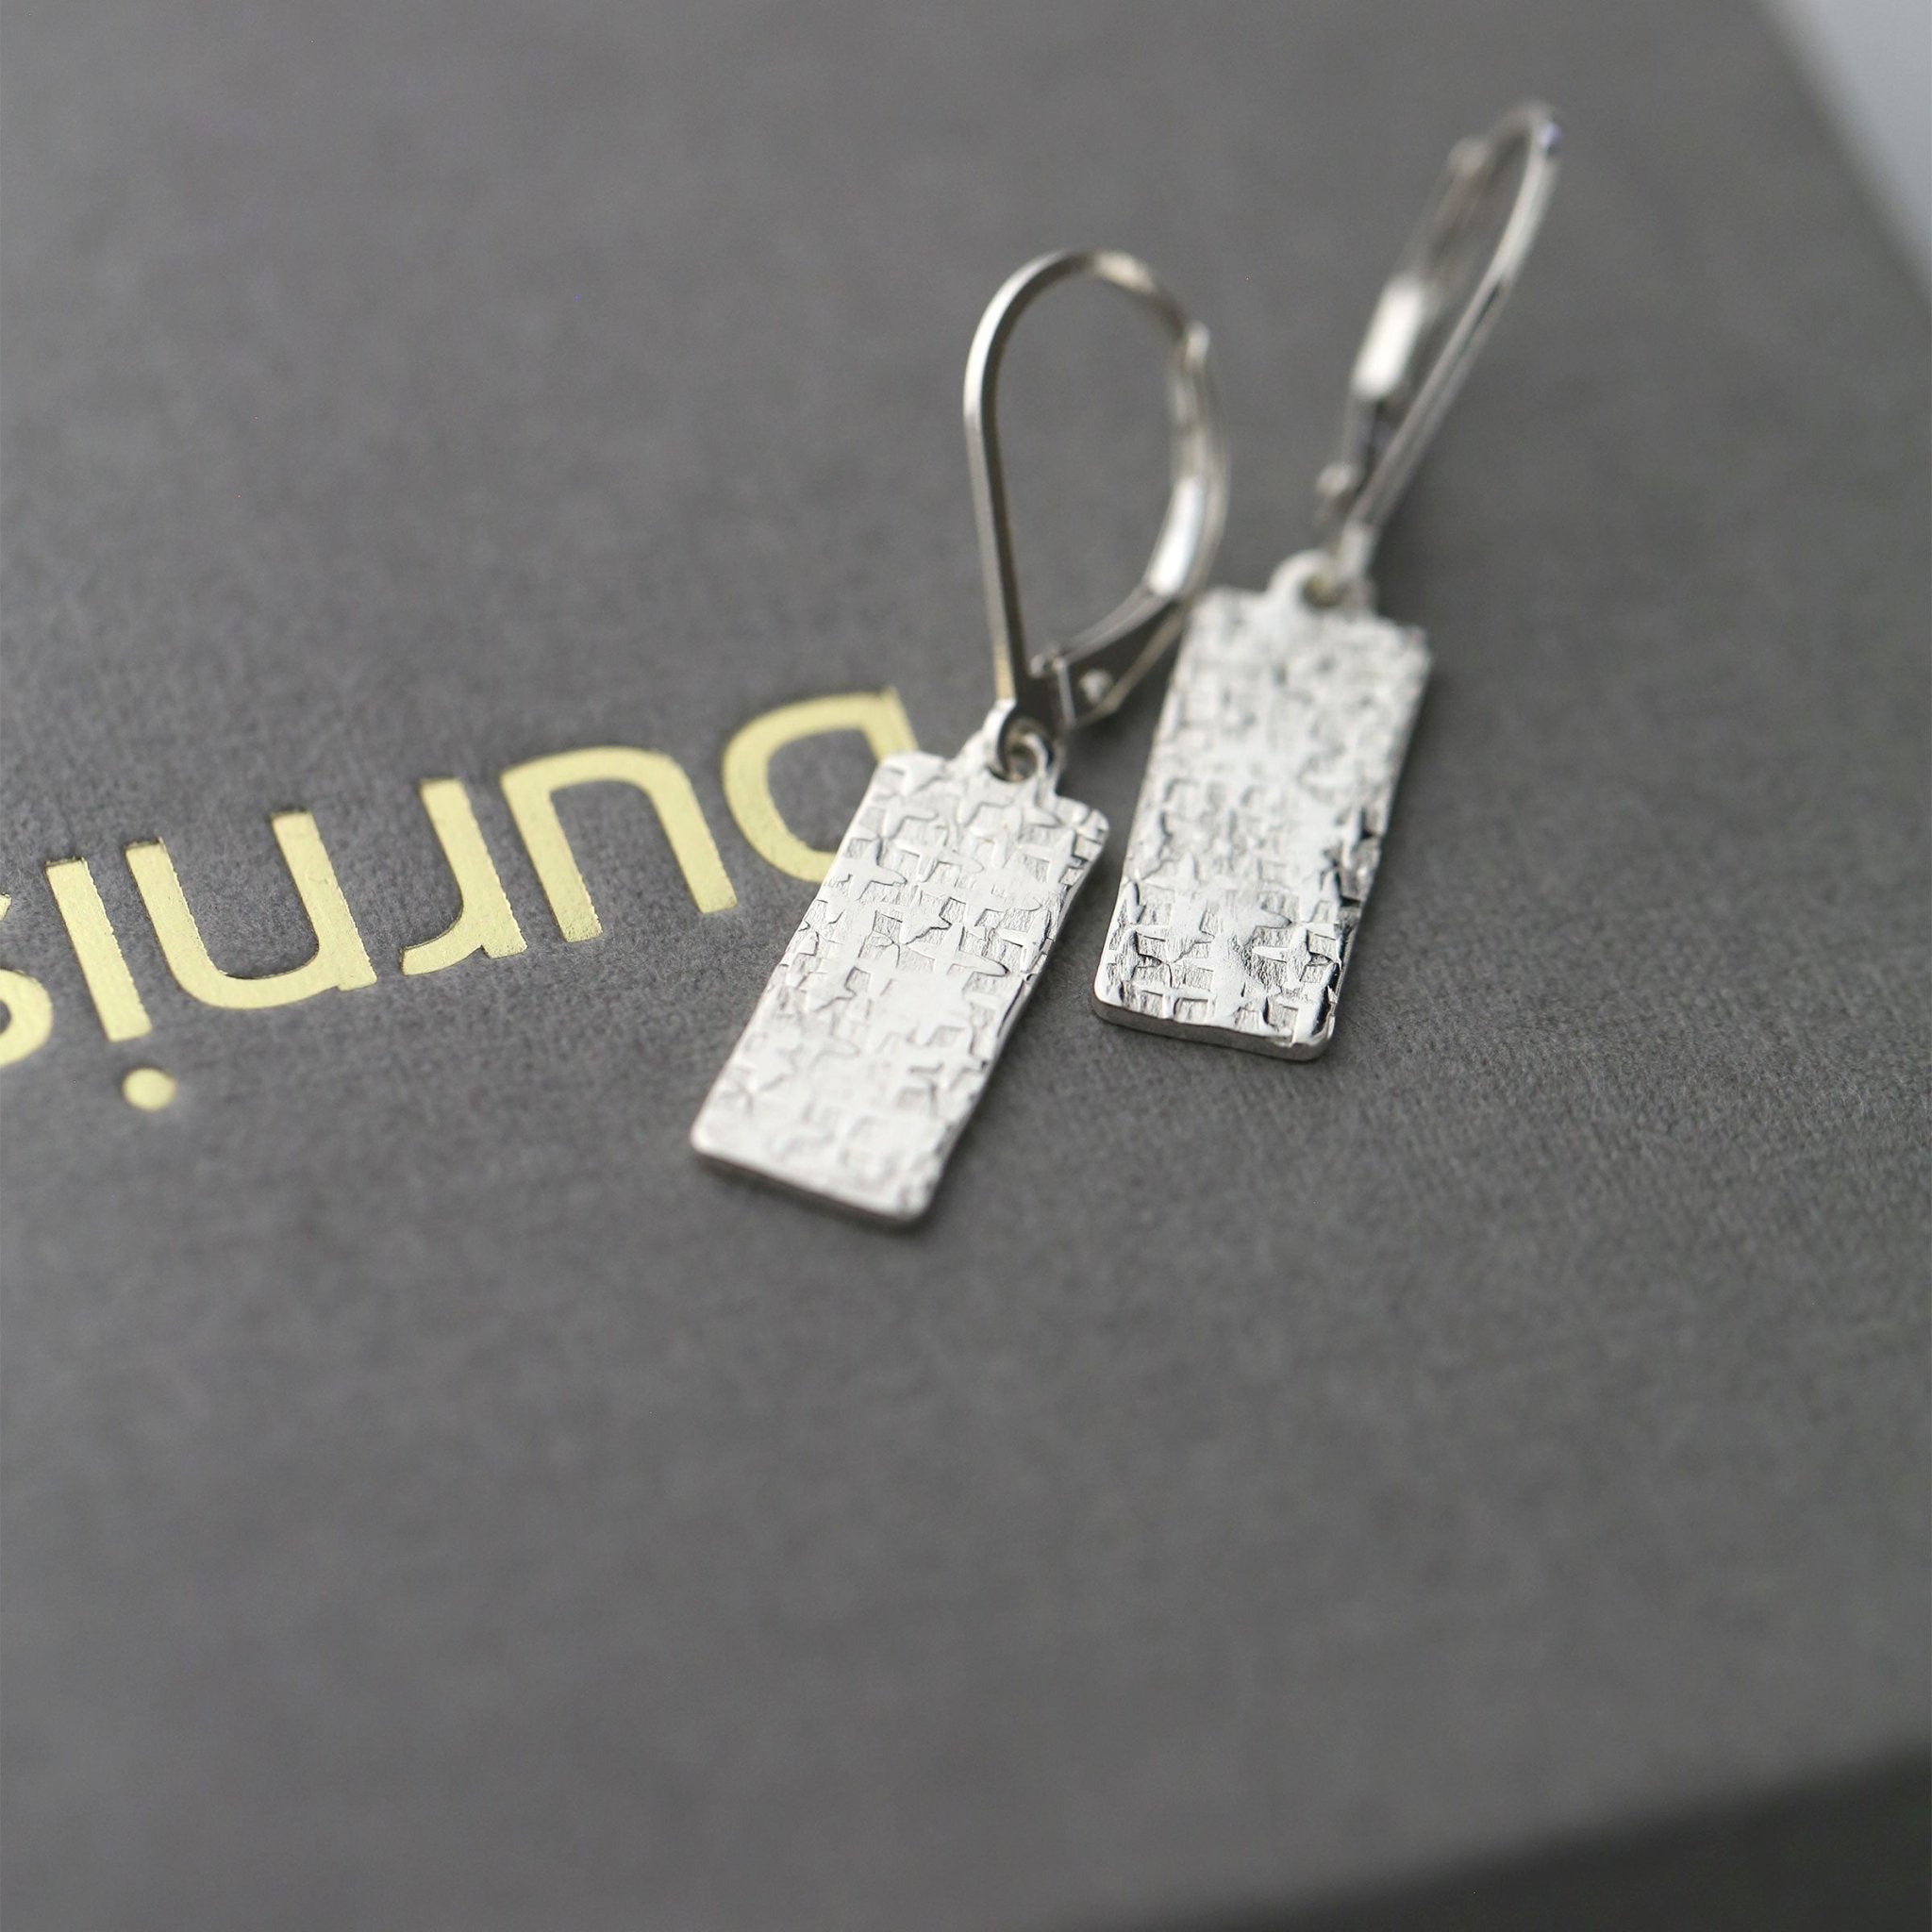 Raw Silk Textured Silver Tag Lever-back Earrings handmade by Burnish